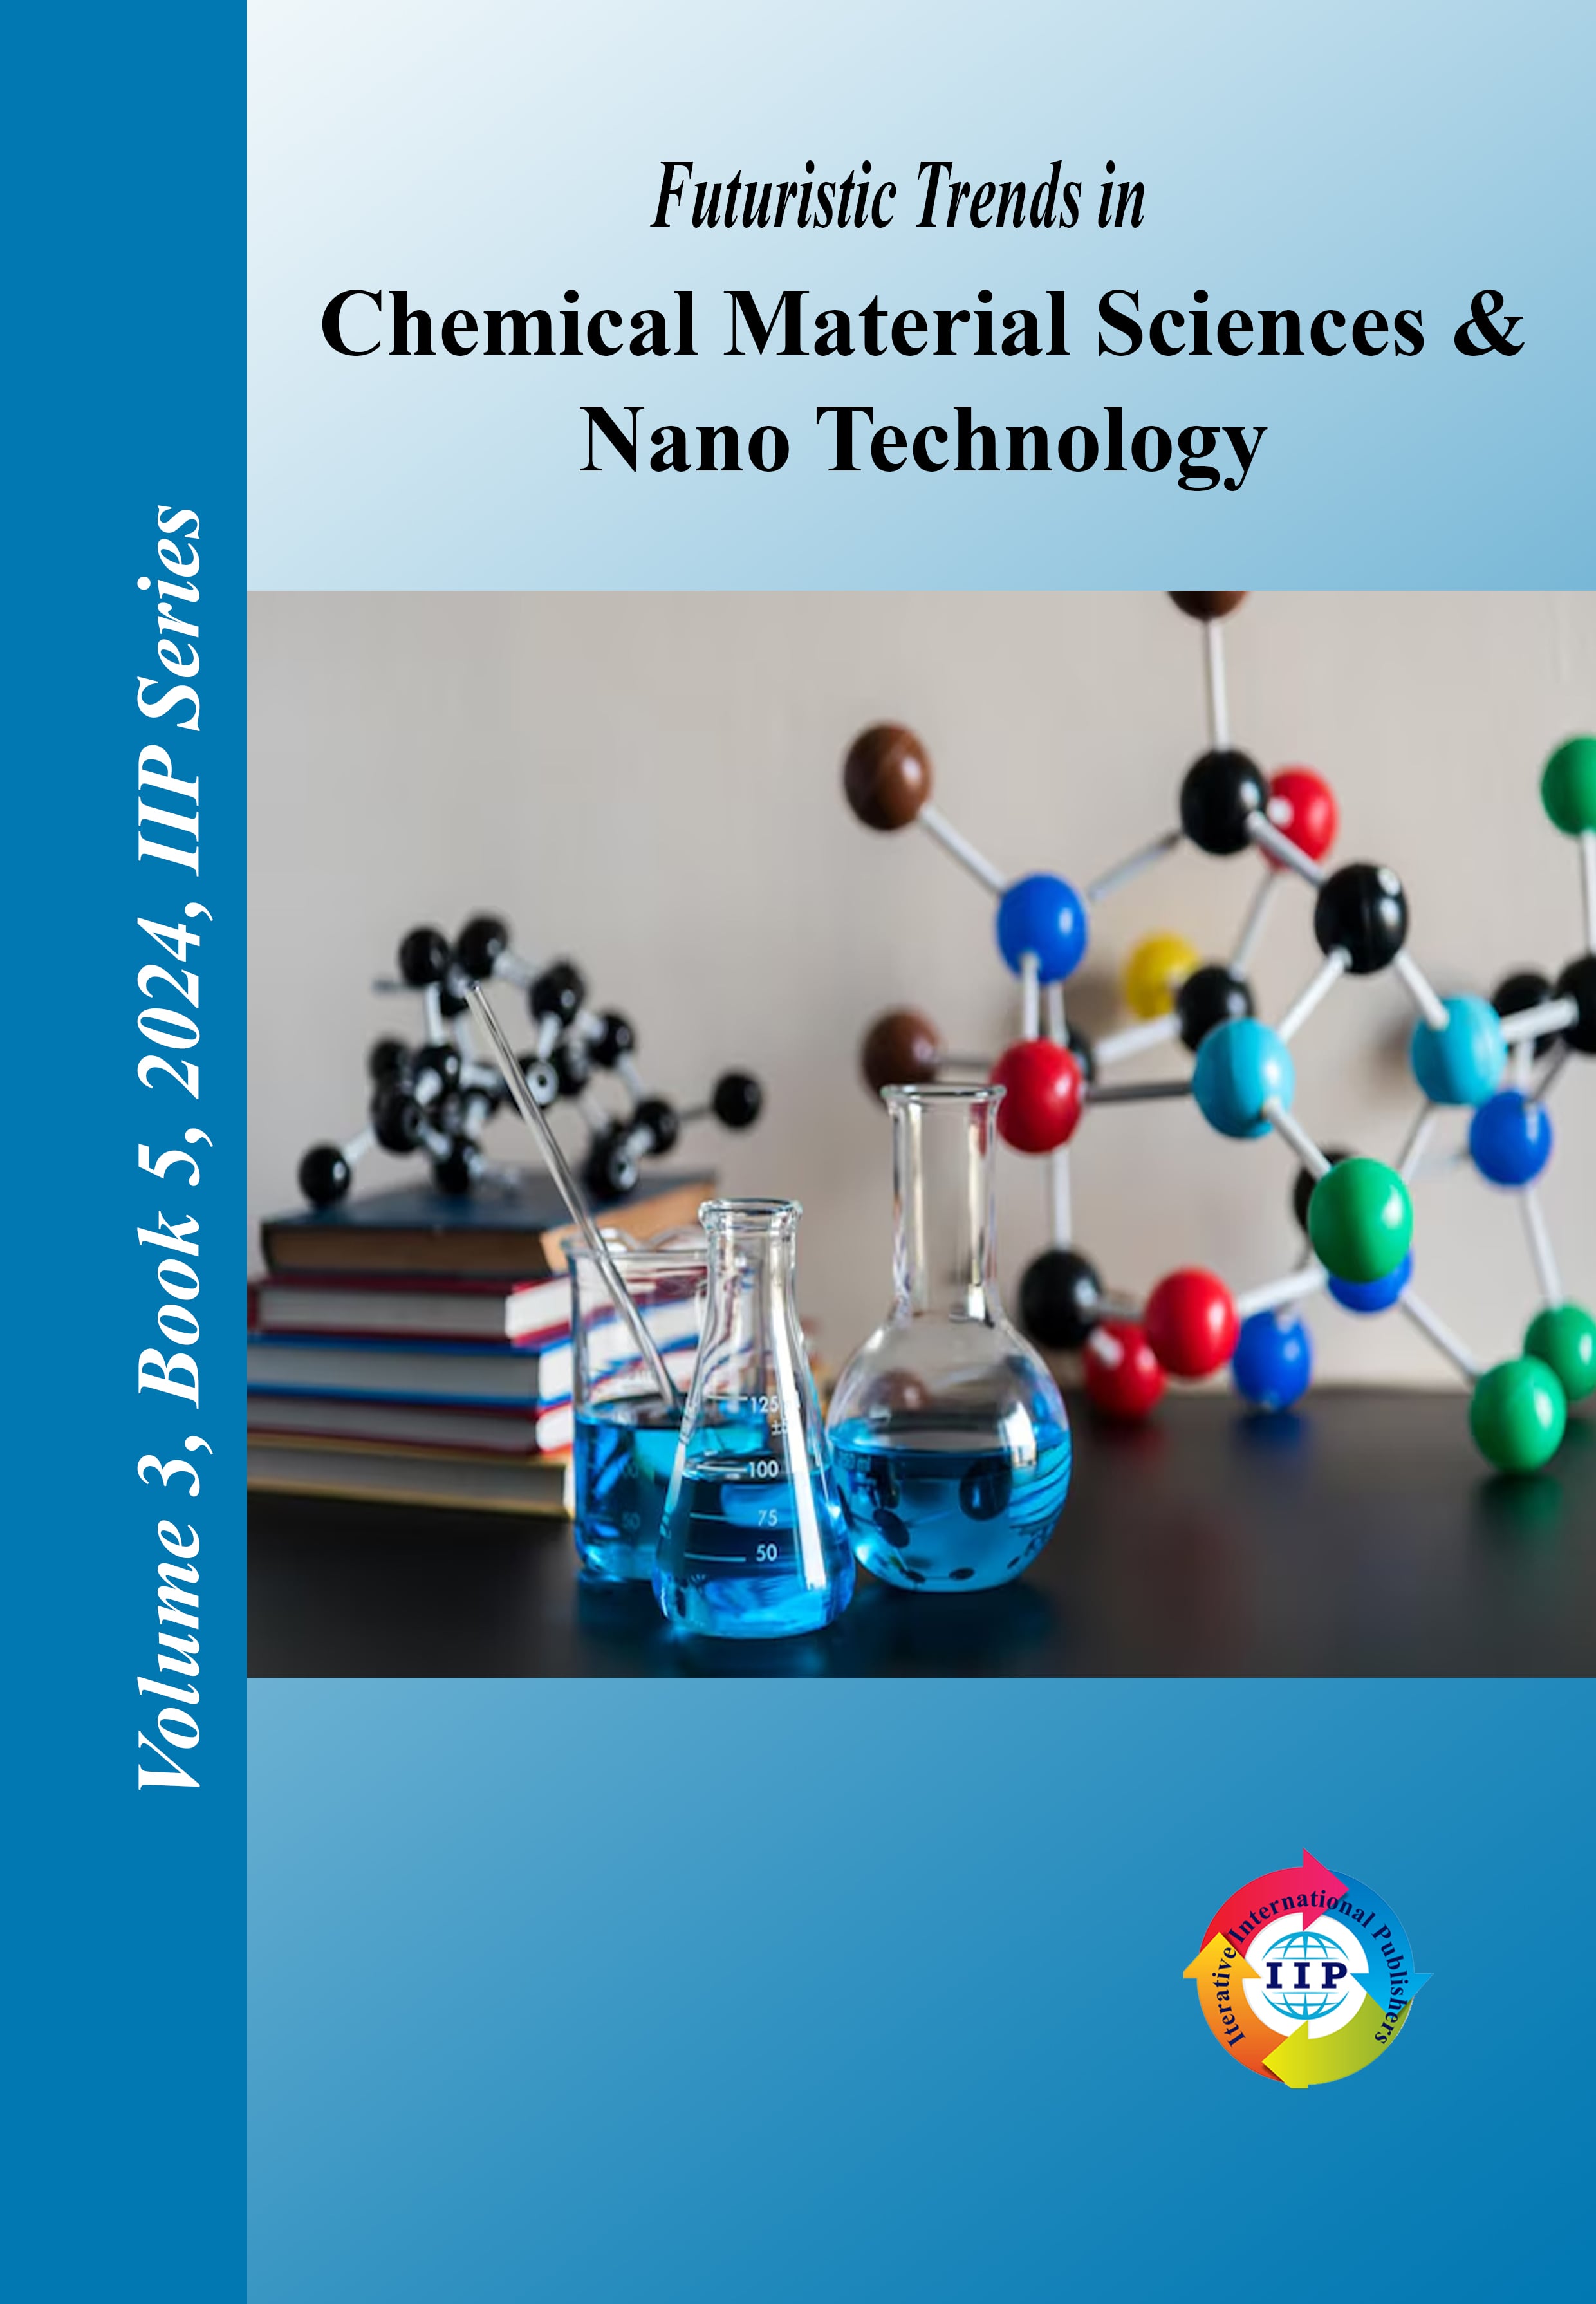 Futuristic Trends in Chemical Material Sciences & Nano Technology  Volume 3 Book 5